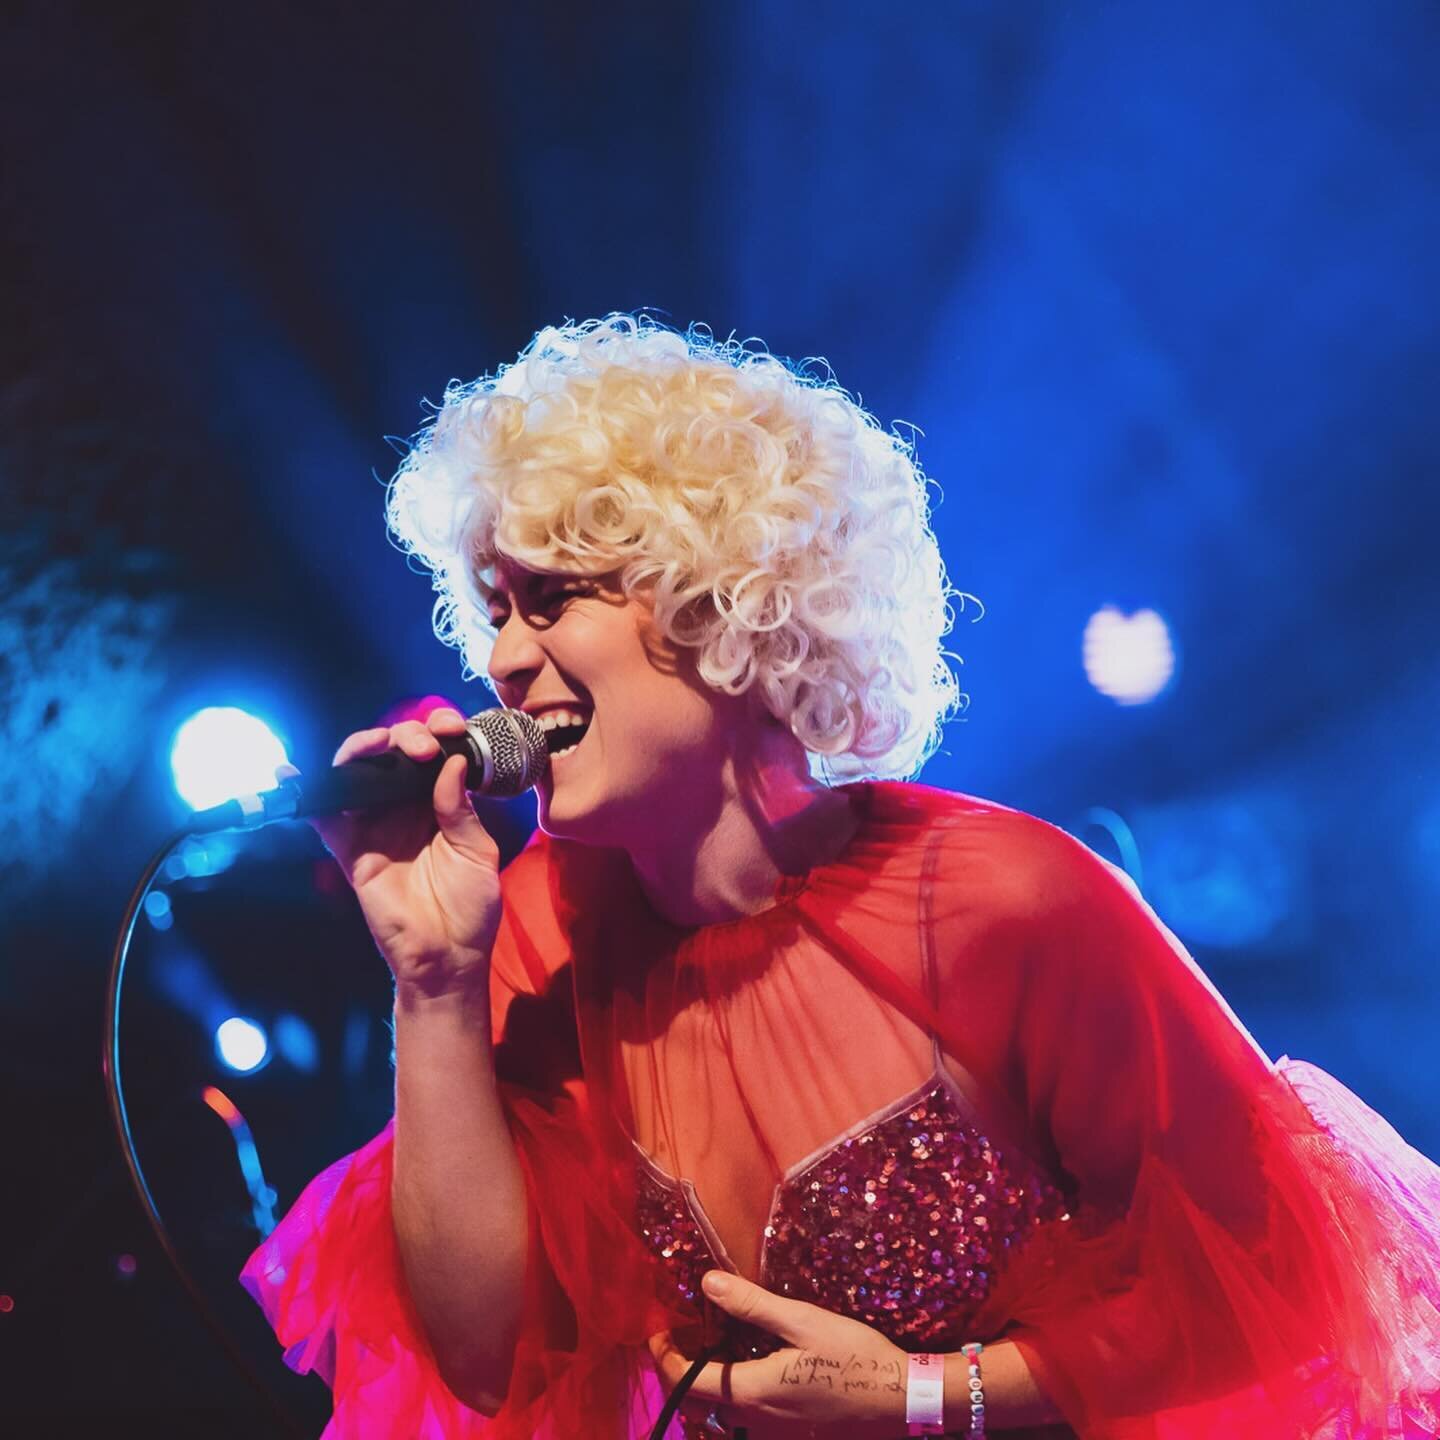 Finally posting these amazing photos from the best night aka the Dolly Parton Valentine's Day show 🪩 Aka SUCH a special night of music, titties, sequins, and so many beautiful people! If you know me you know Dolly is one of my biggest inspirations a